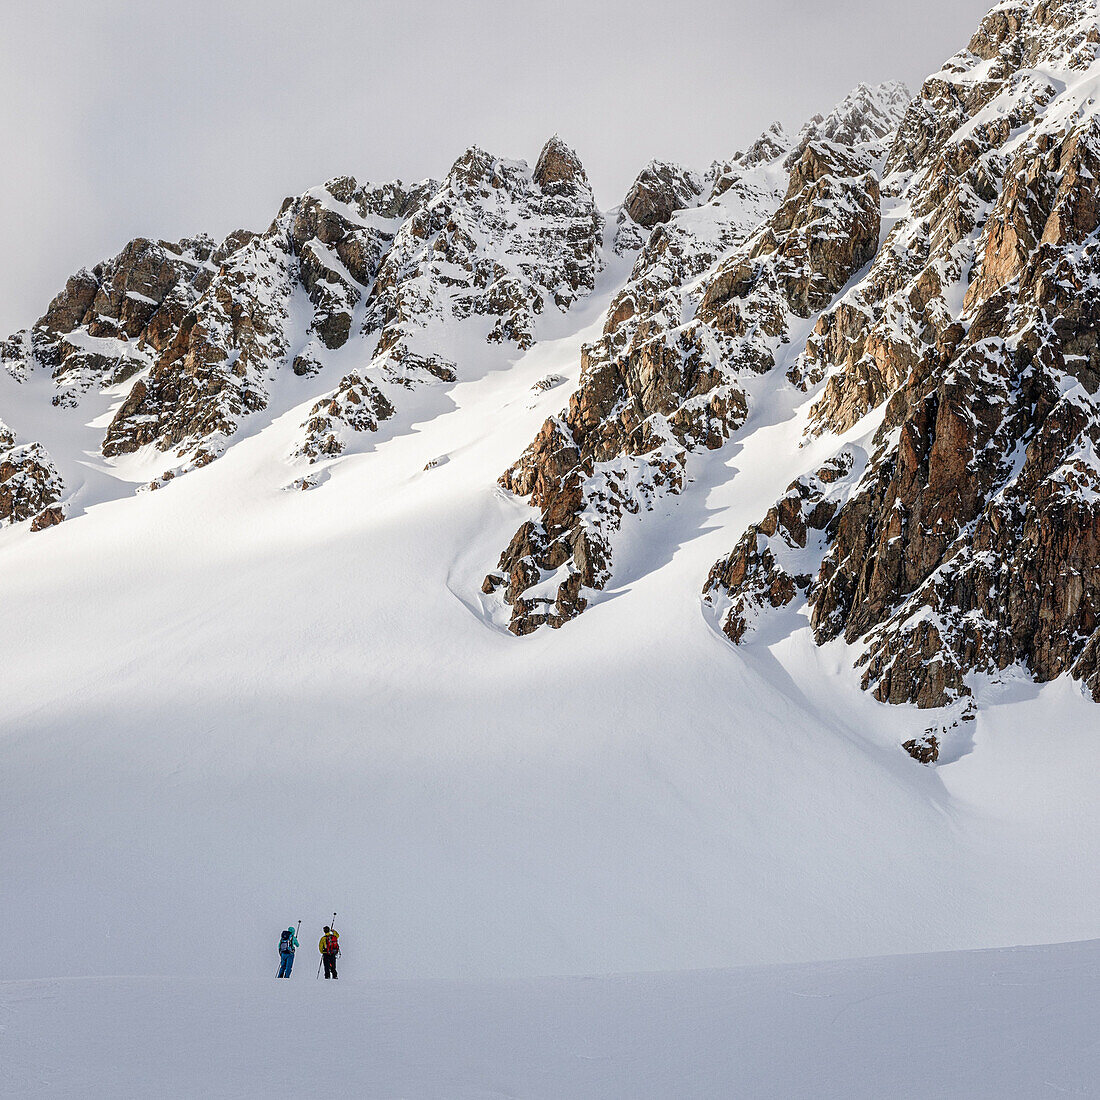 Two ski mountaineers have a look on an untracked, rocky slope, Tuoi hut, Scuol, Silvretta, Switzerland